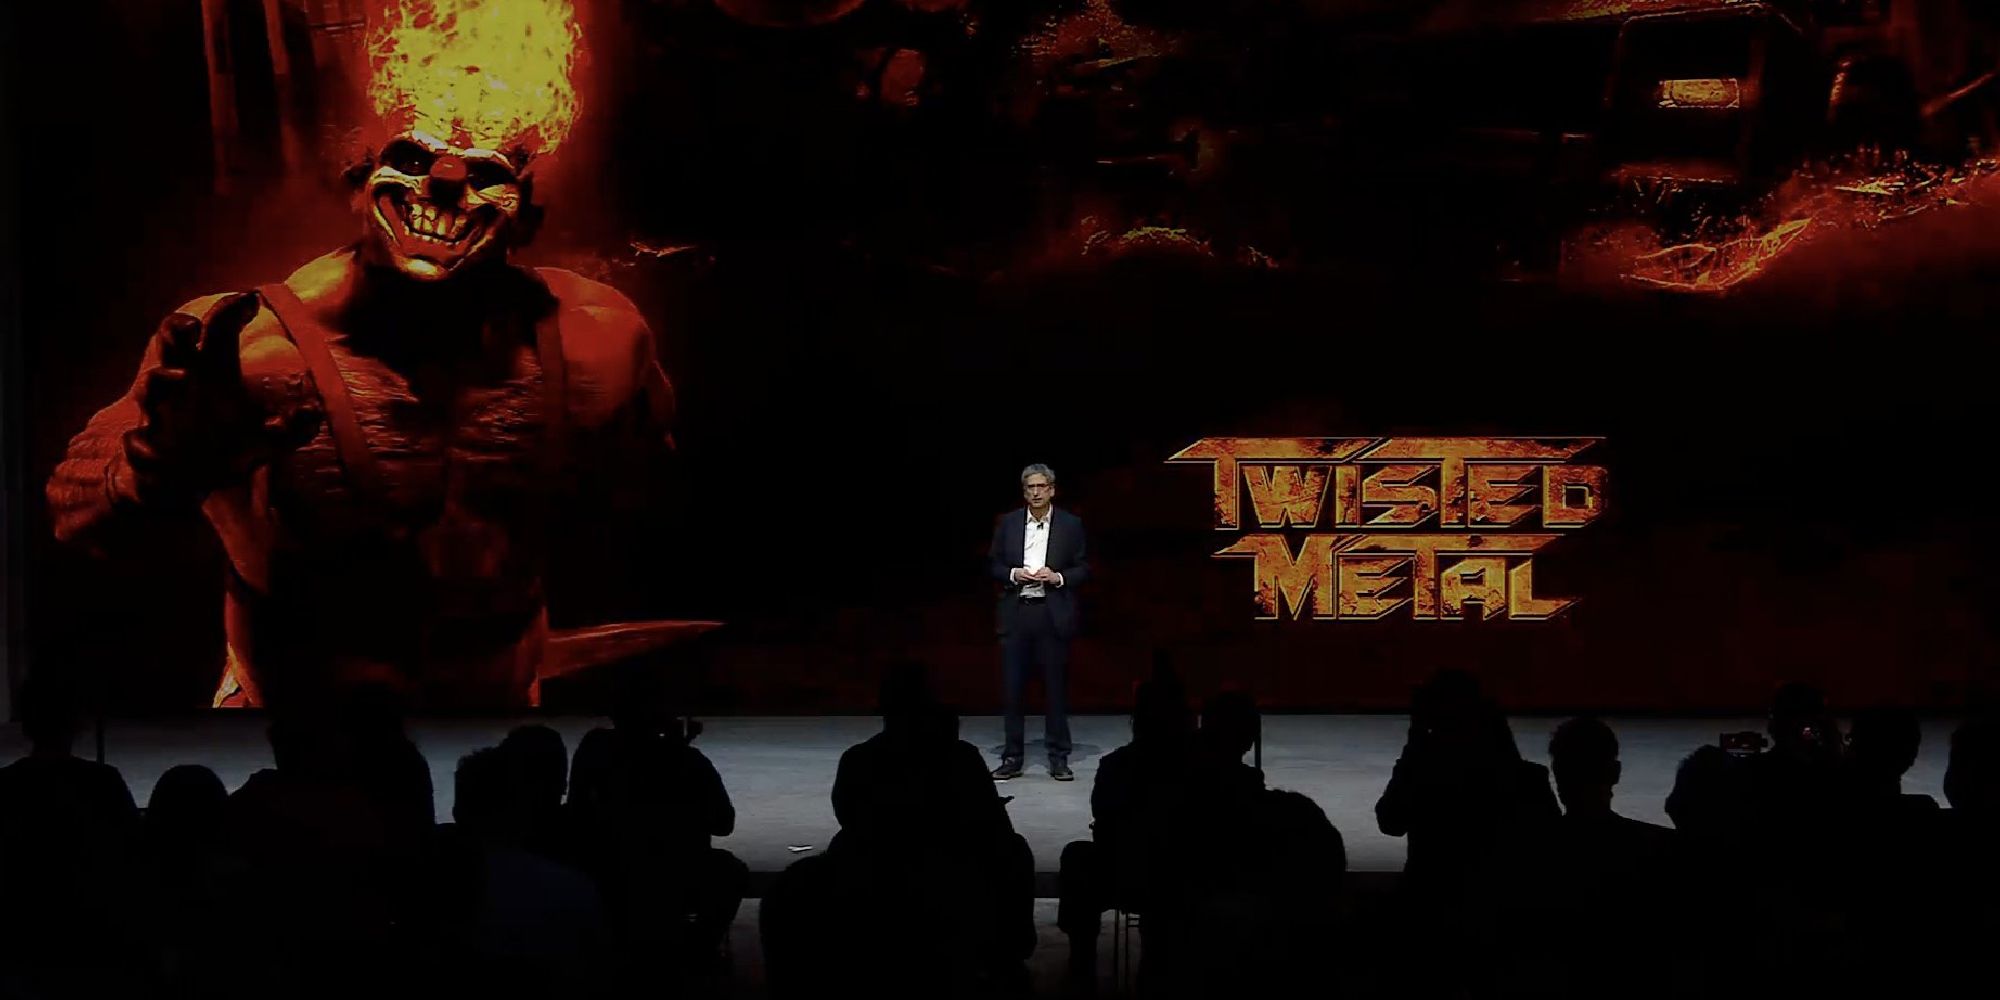 Twisted Metal TV series announced by Sony on stage with the silhouette of an audience